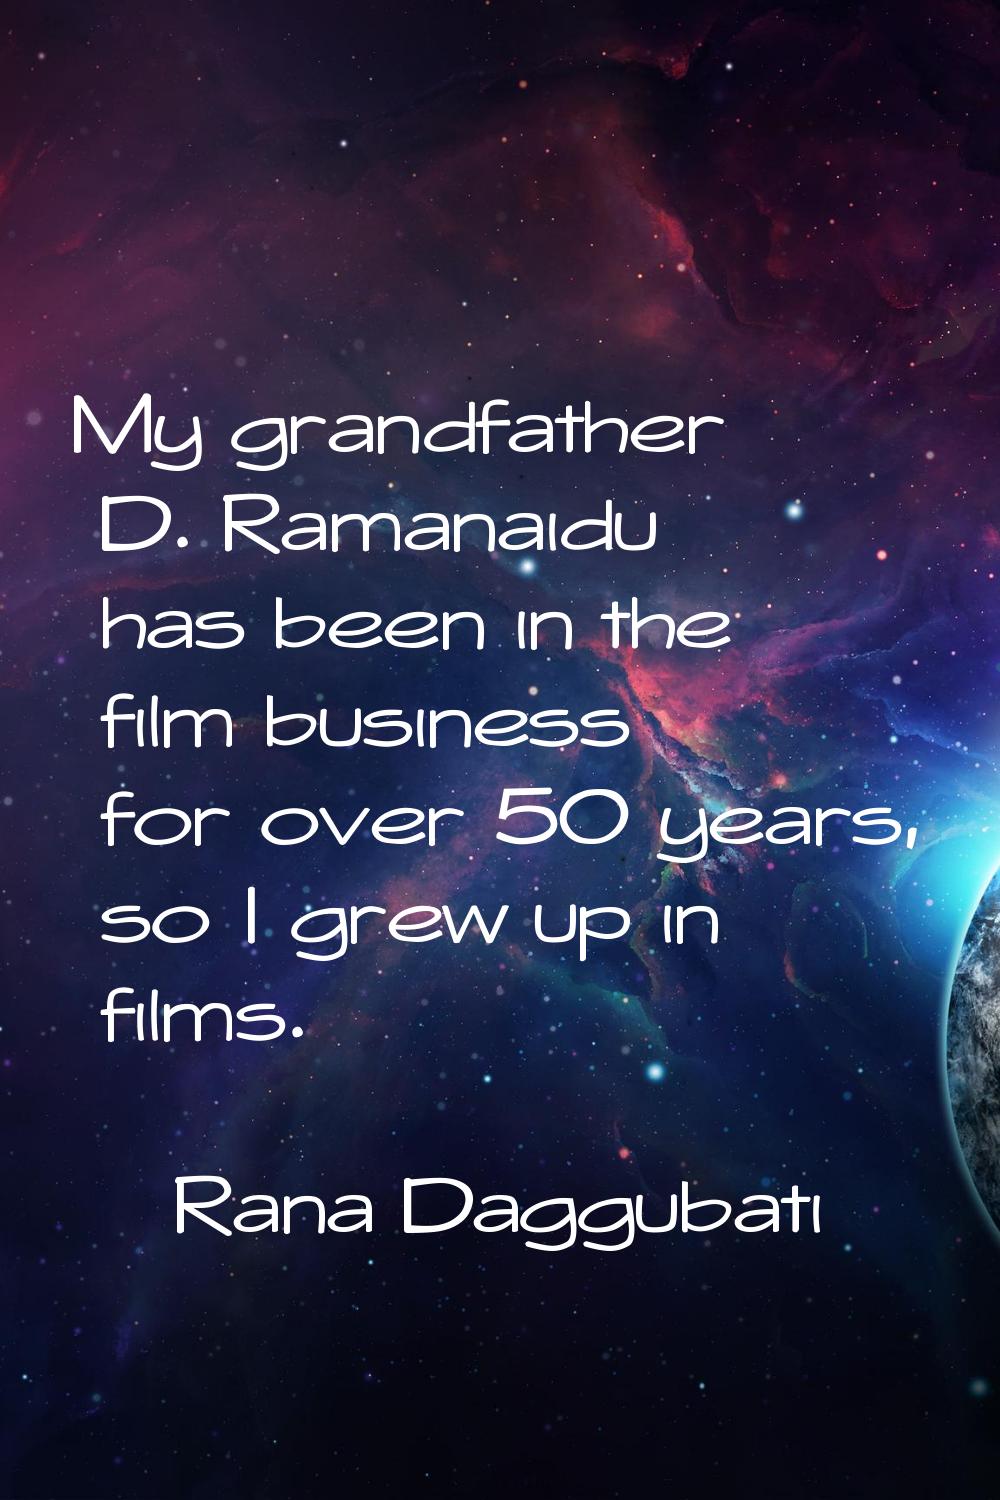 My grandfather D. Ramanaidu has been in the film business for over 50 years, so I grew up in films.